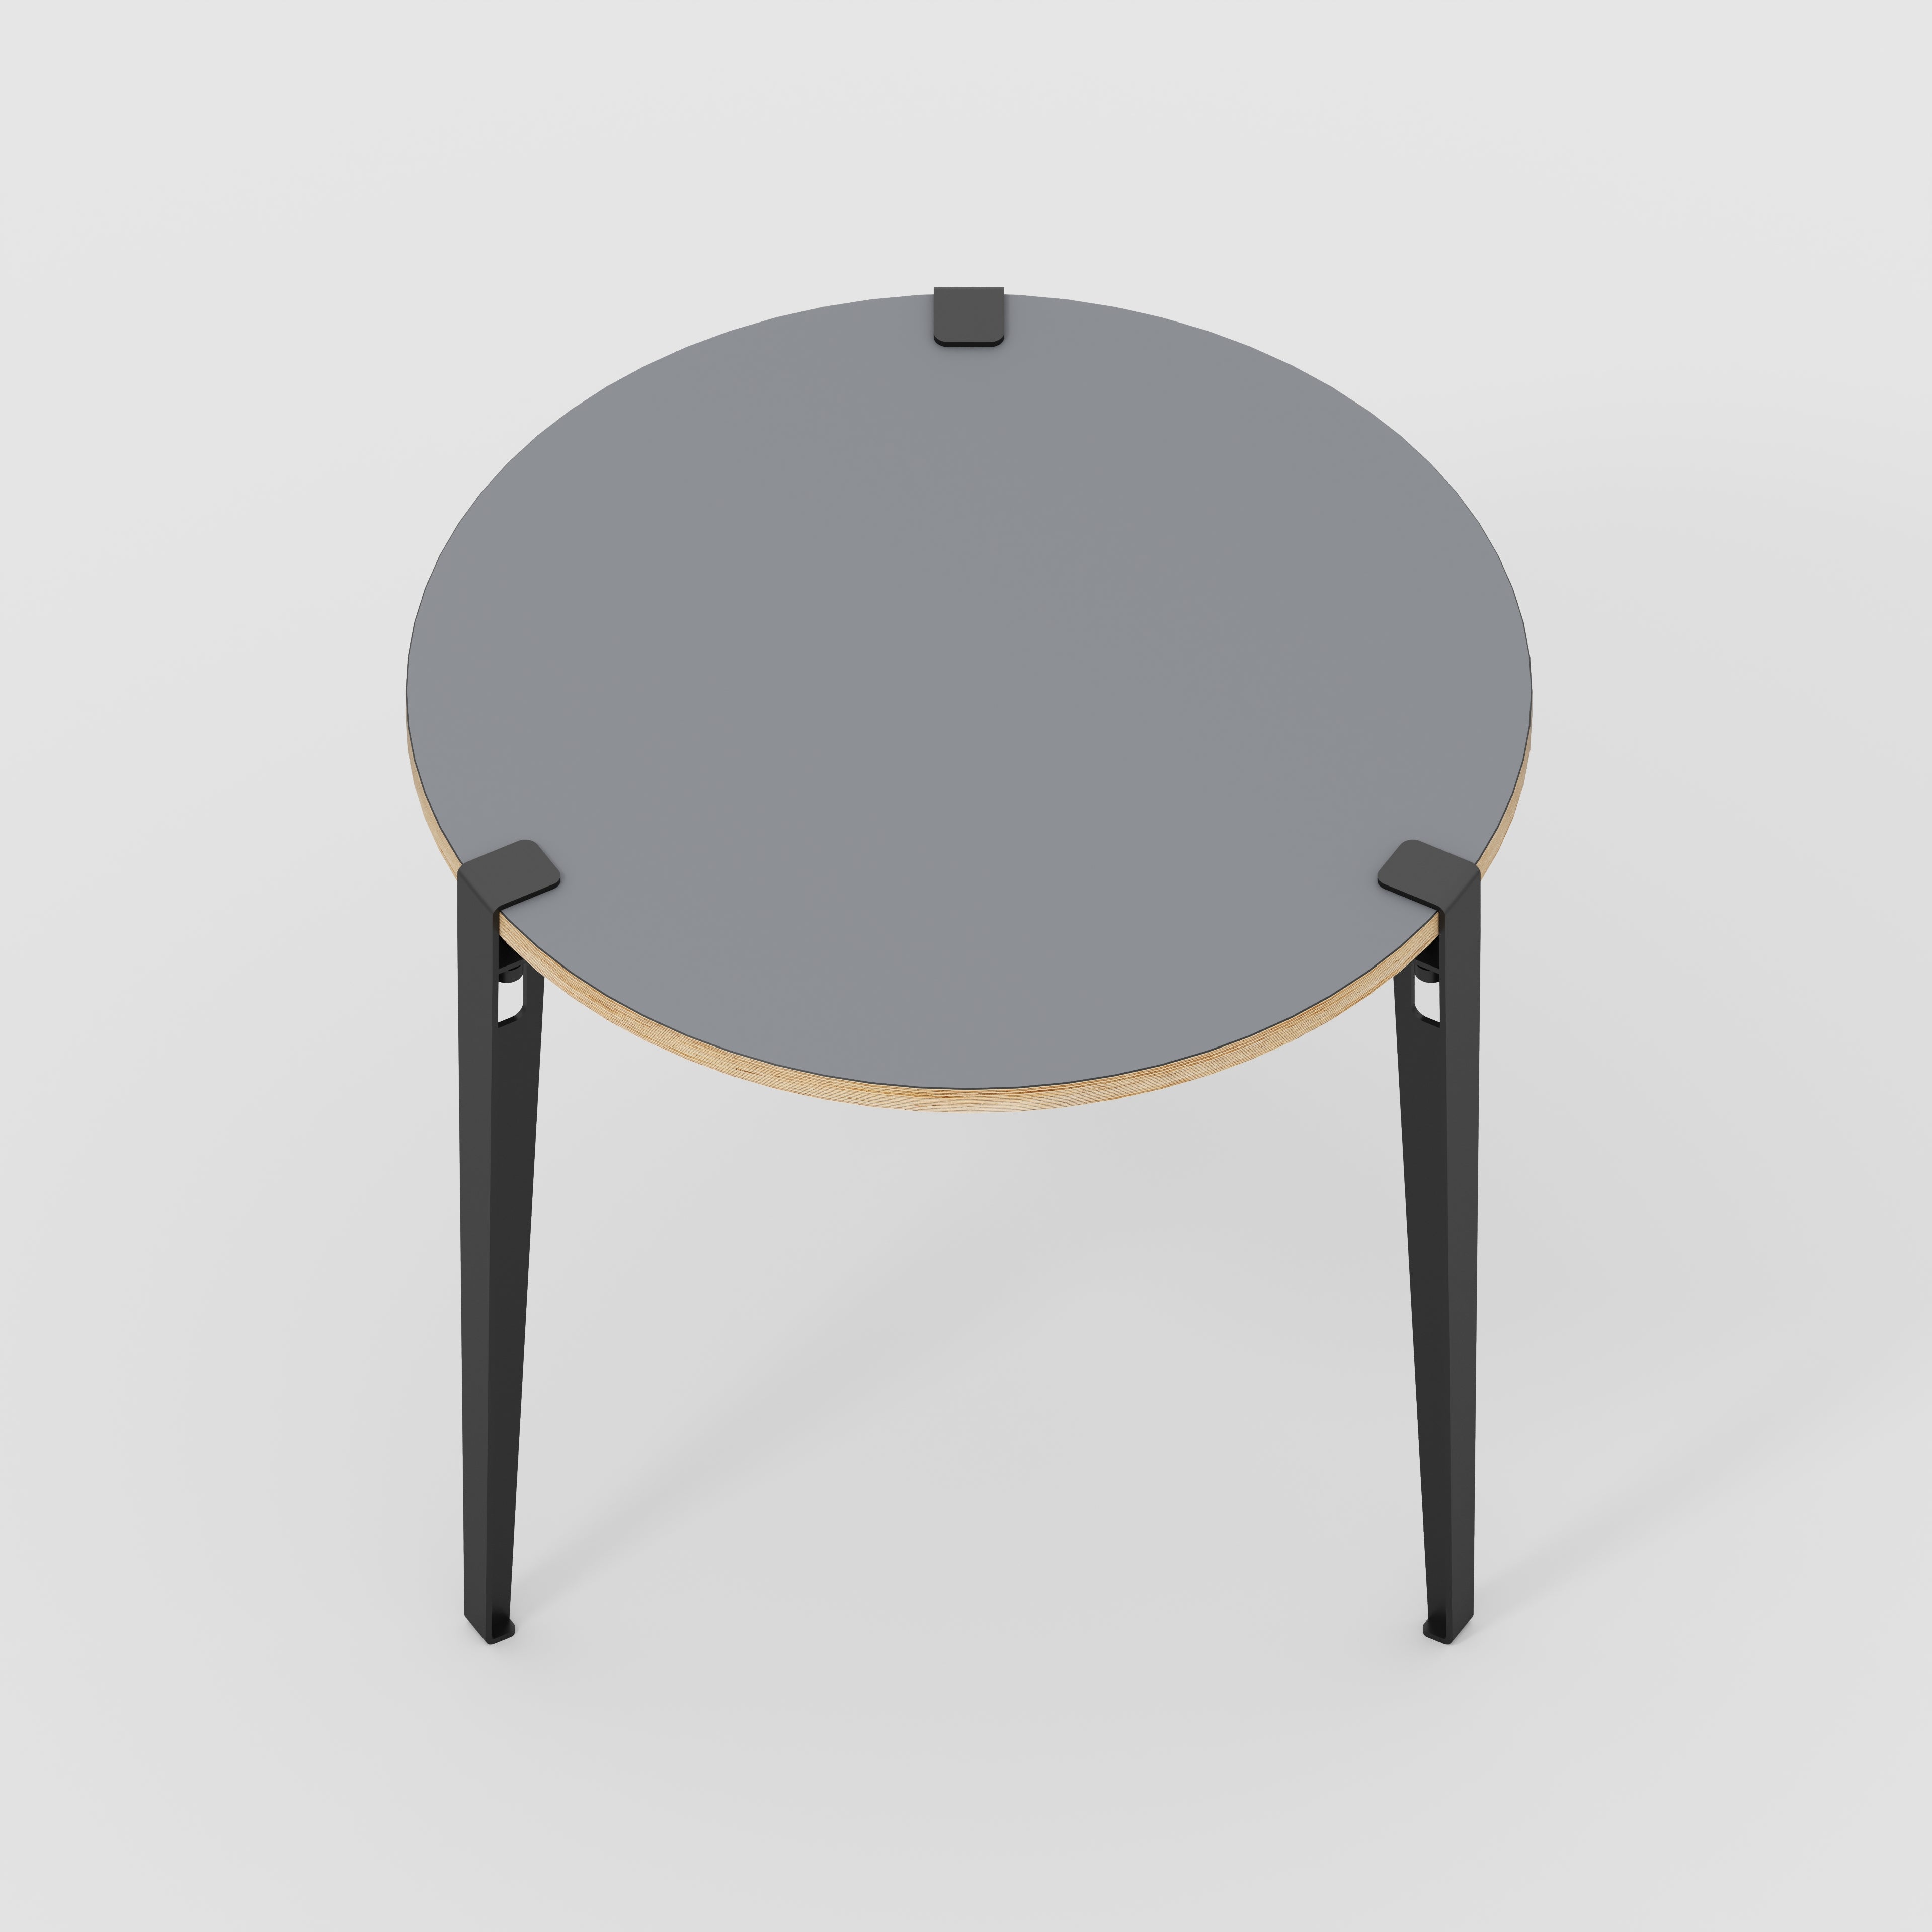 Round Table with Black Tiptoe Legs - Formica Tornado Grey - 800(dia) x 750(h)